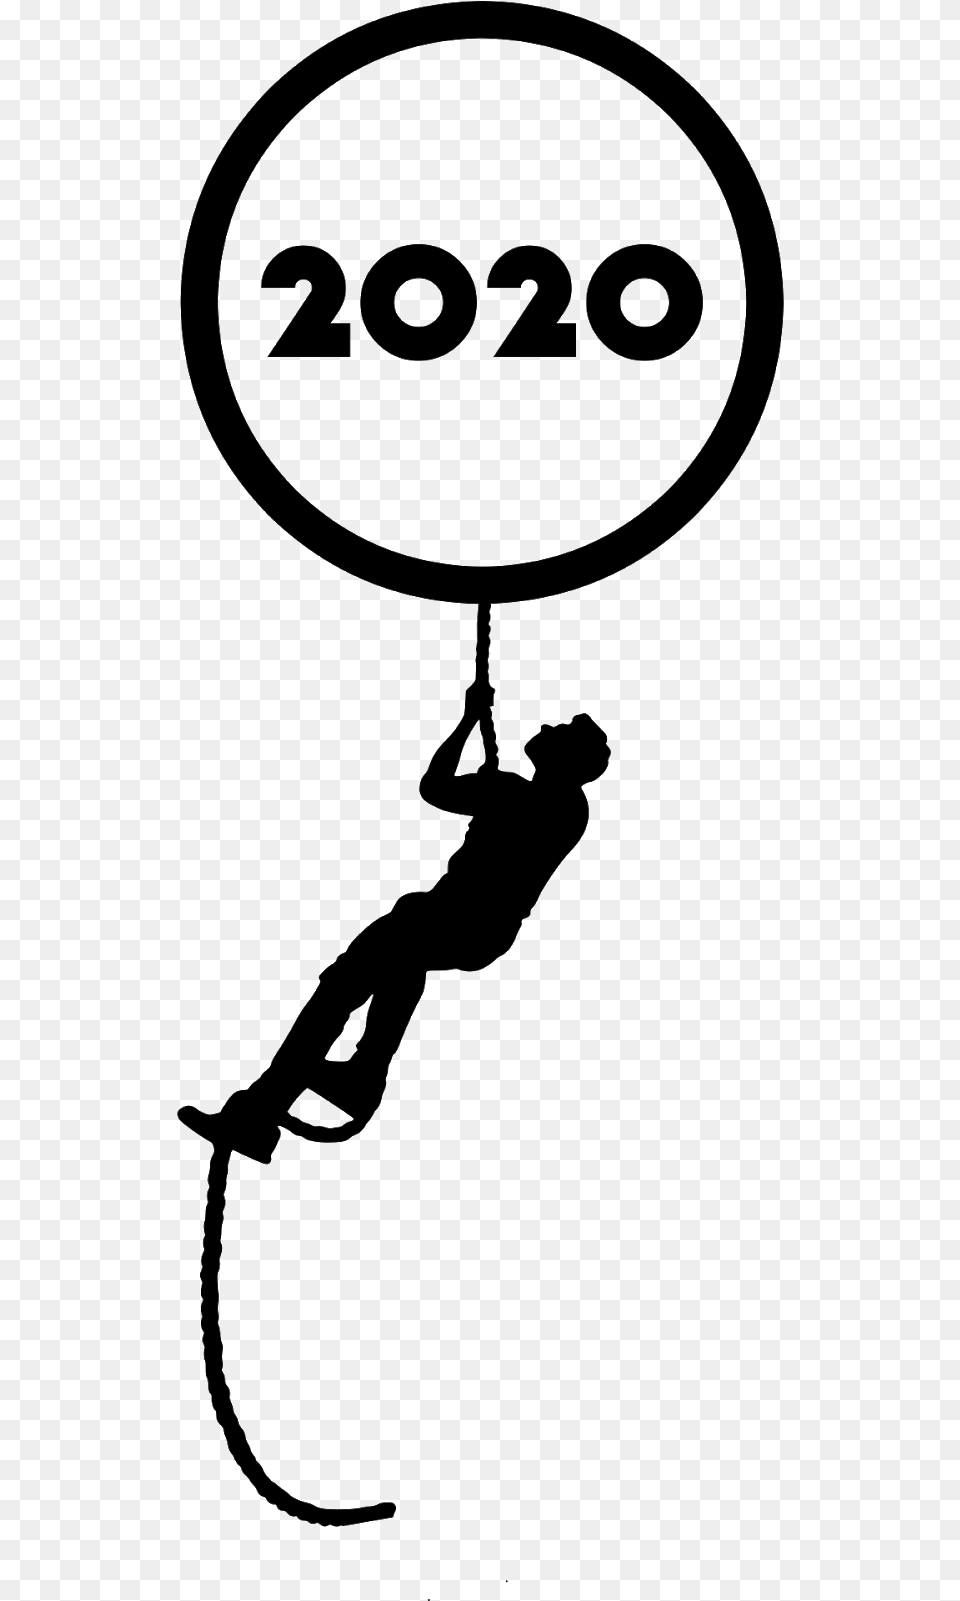 Newyear 2020 To Reach Silhouette Climbing Advertisement Happy New Year 2020 Silhouette, Gray Free Png